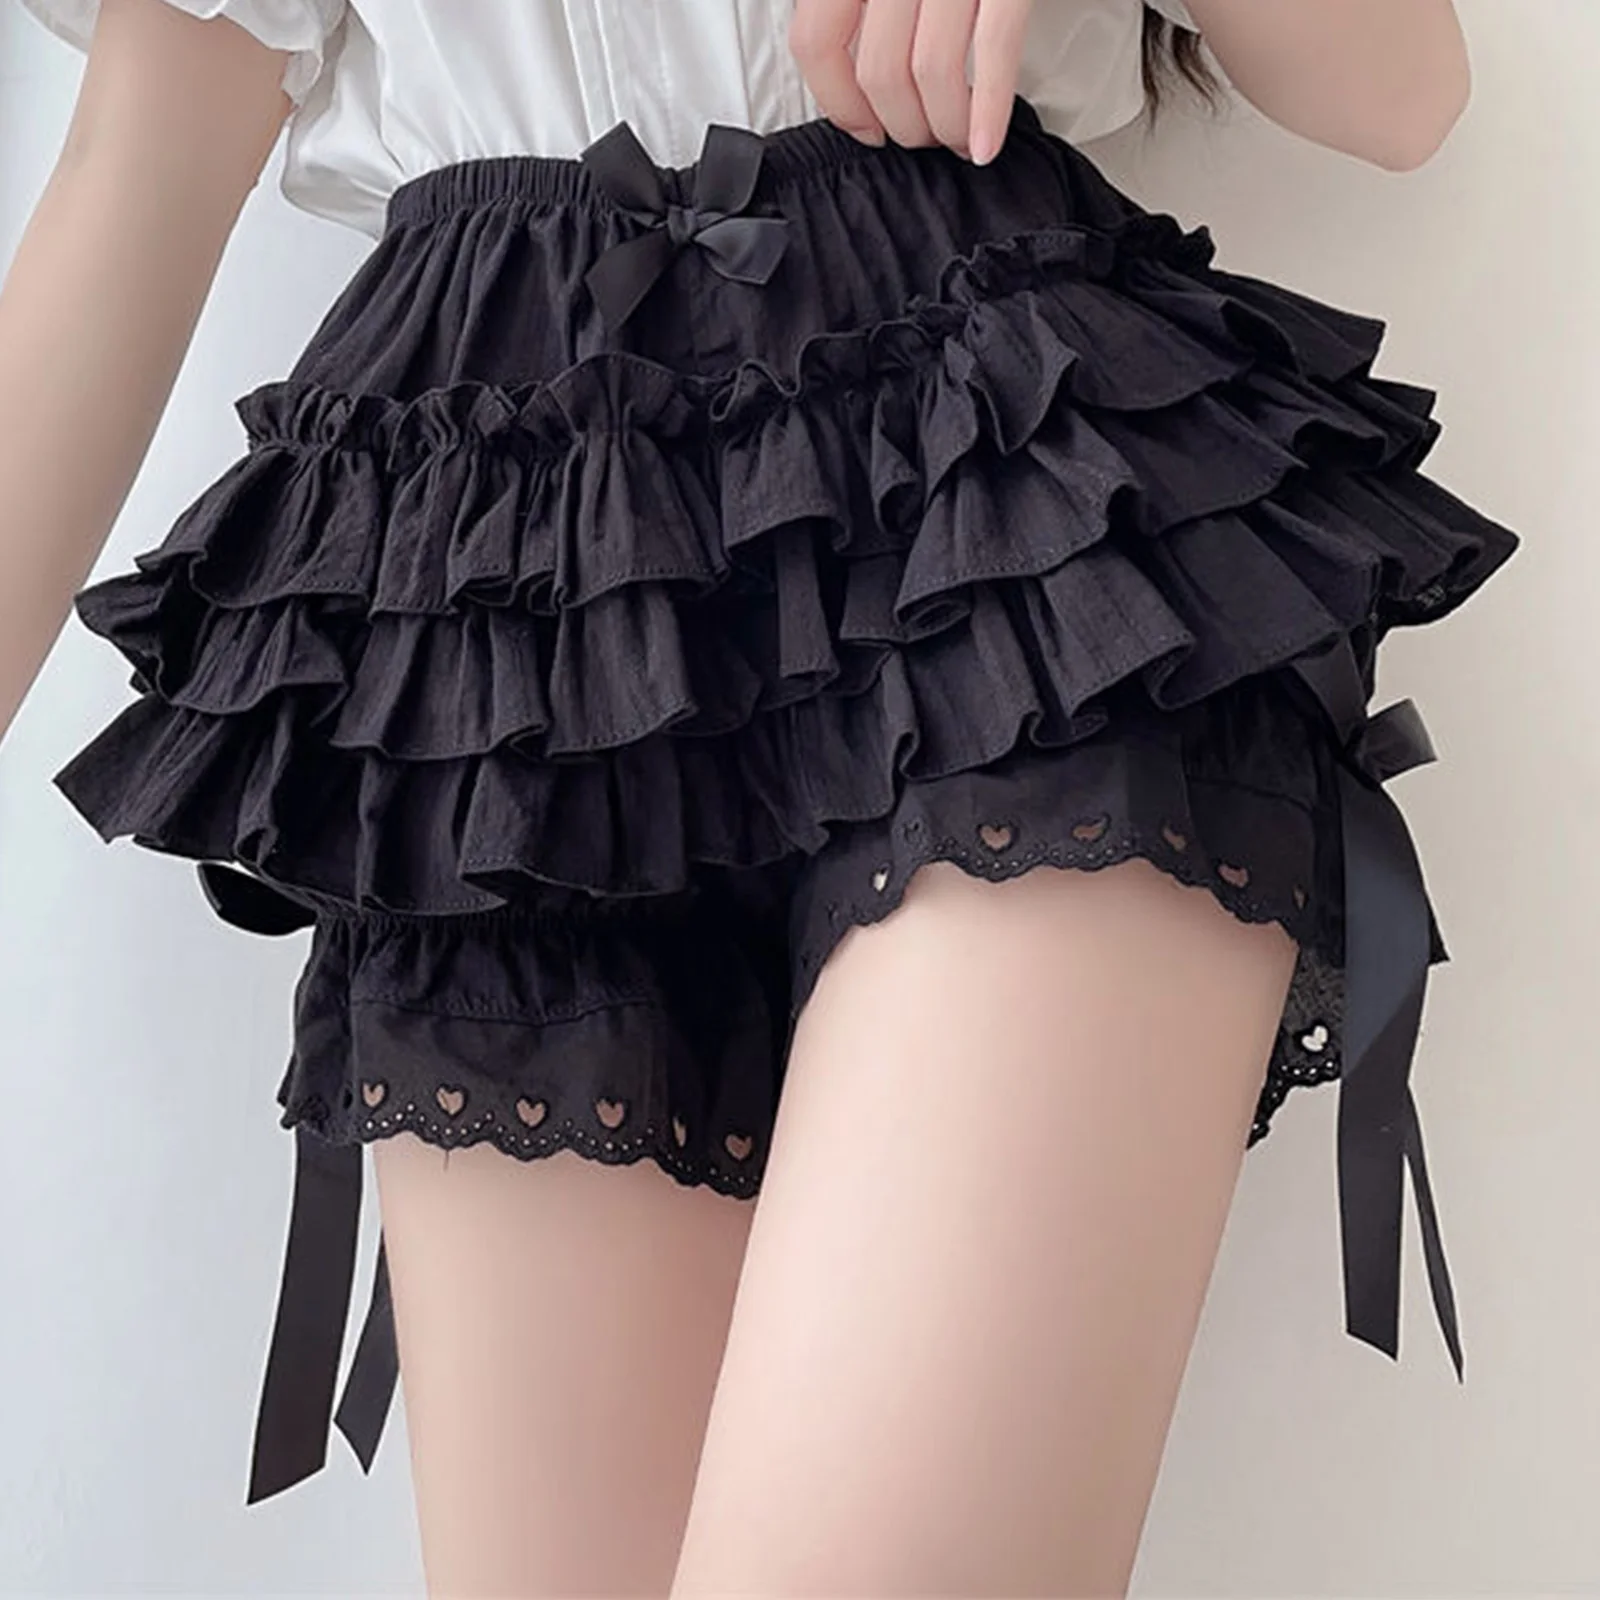 

Womens Cake Skirts Frilly Bloomers Shorts Bowknot Maid Waist Ruched Culottes Ruffled Panties for Halloween Masquerade Party